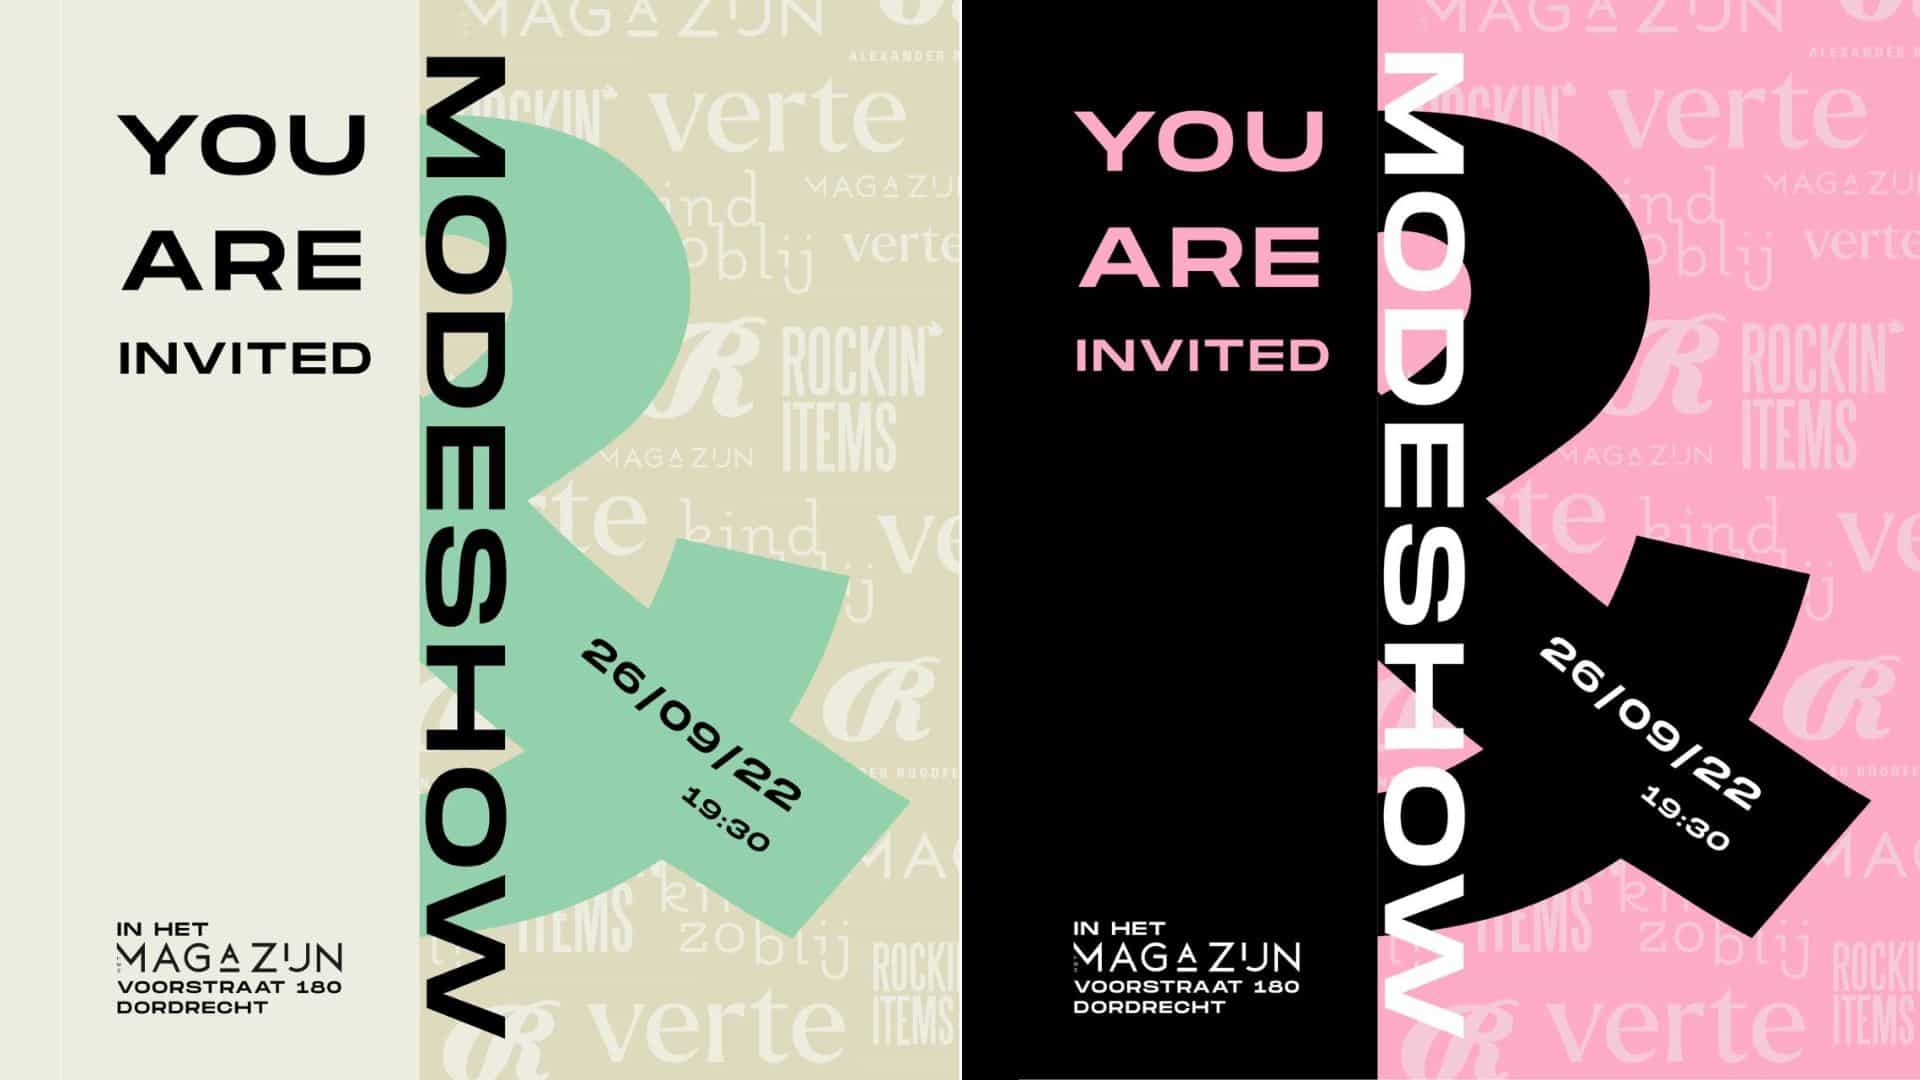 Modeshow – You’re invited!